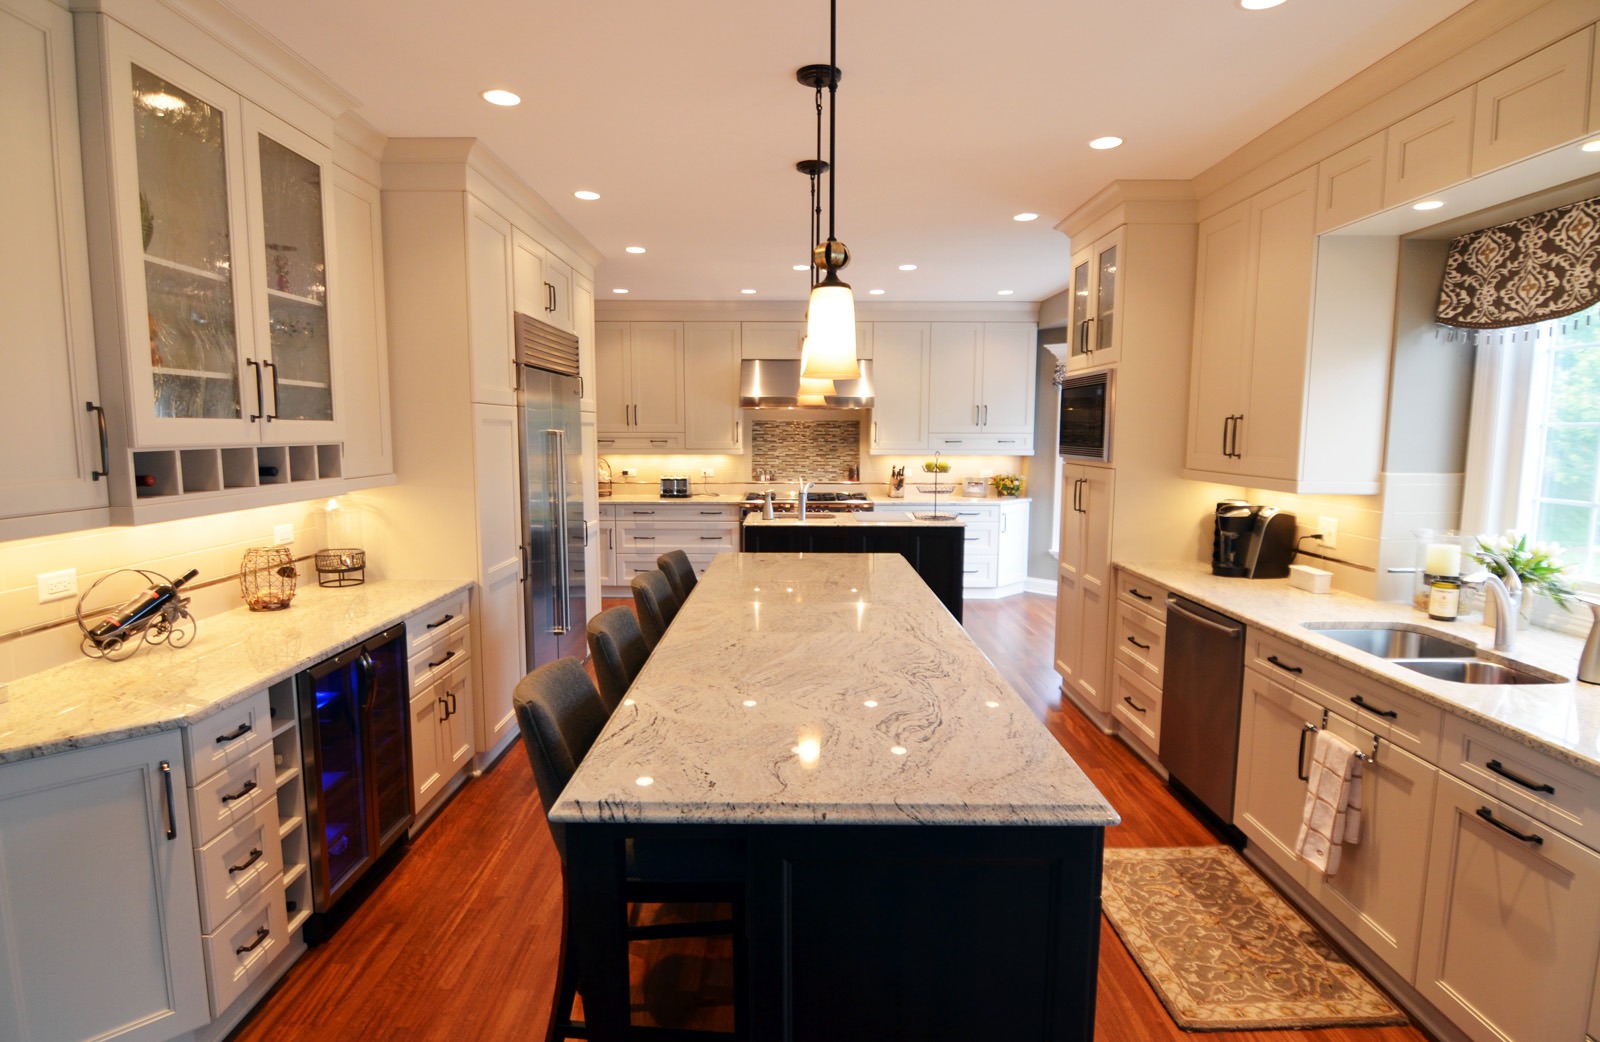 the kitchen master galley style renovation white cabinet large stone island with bar seating 